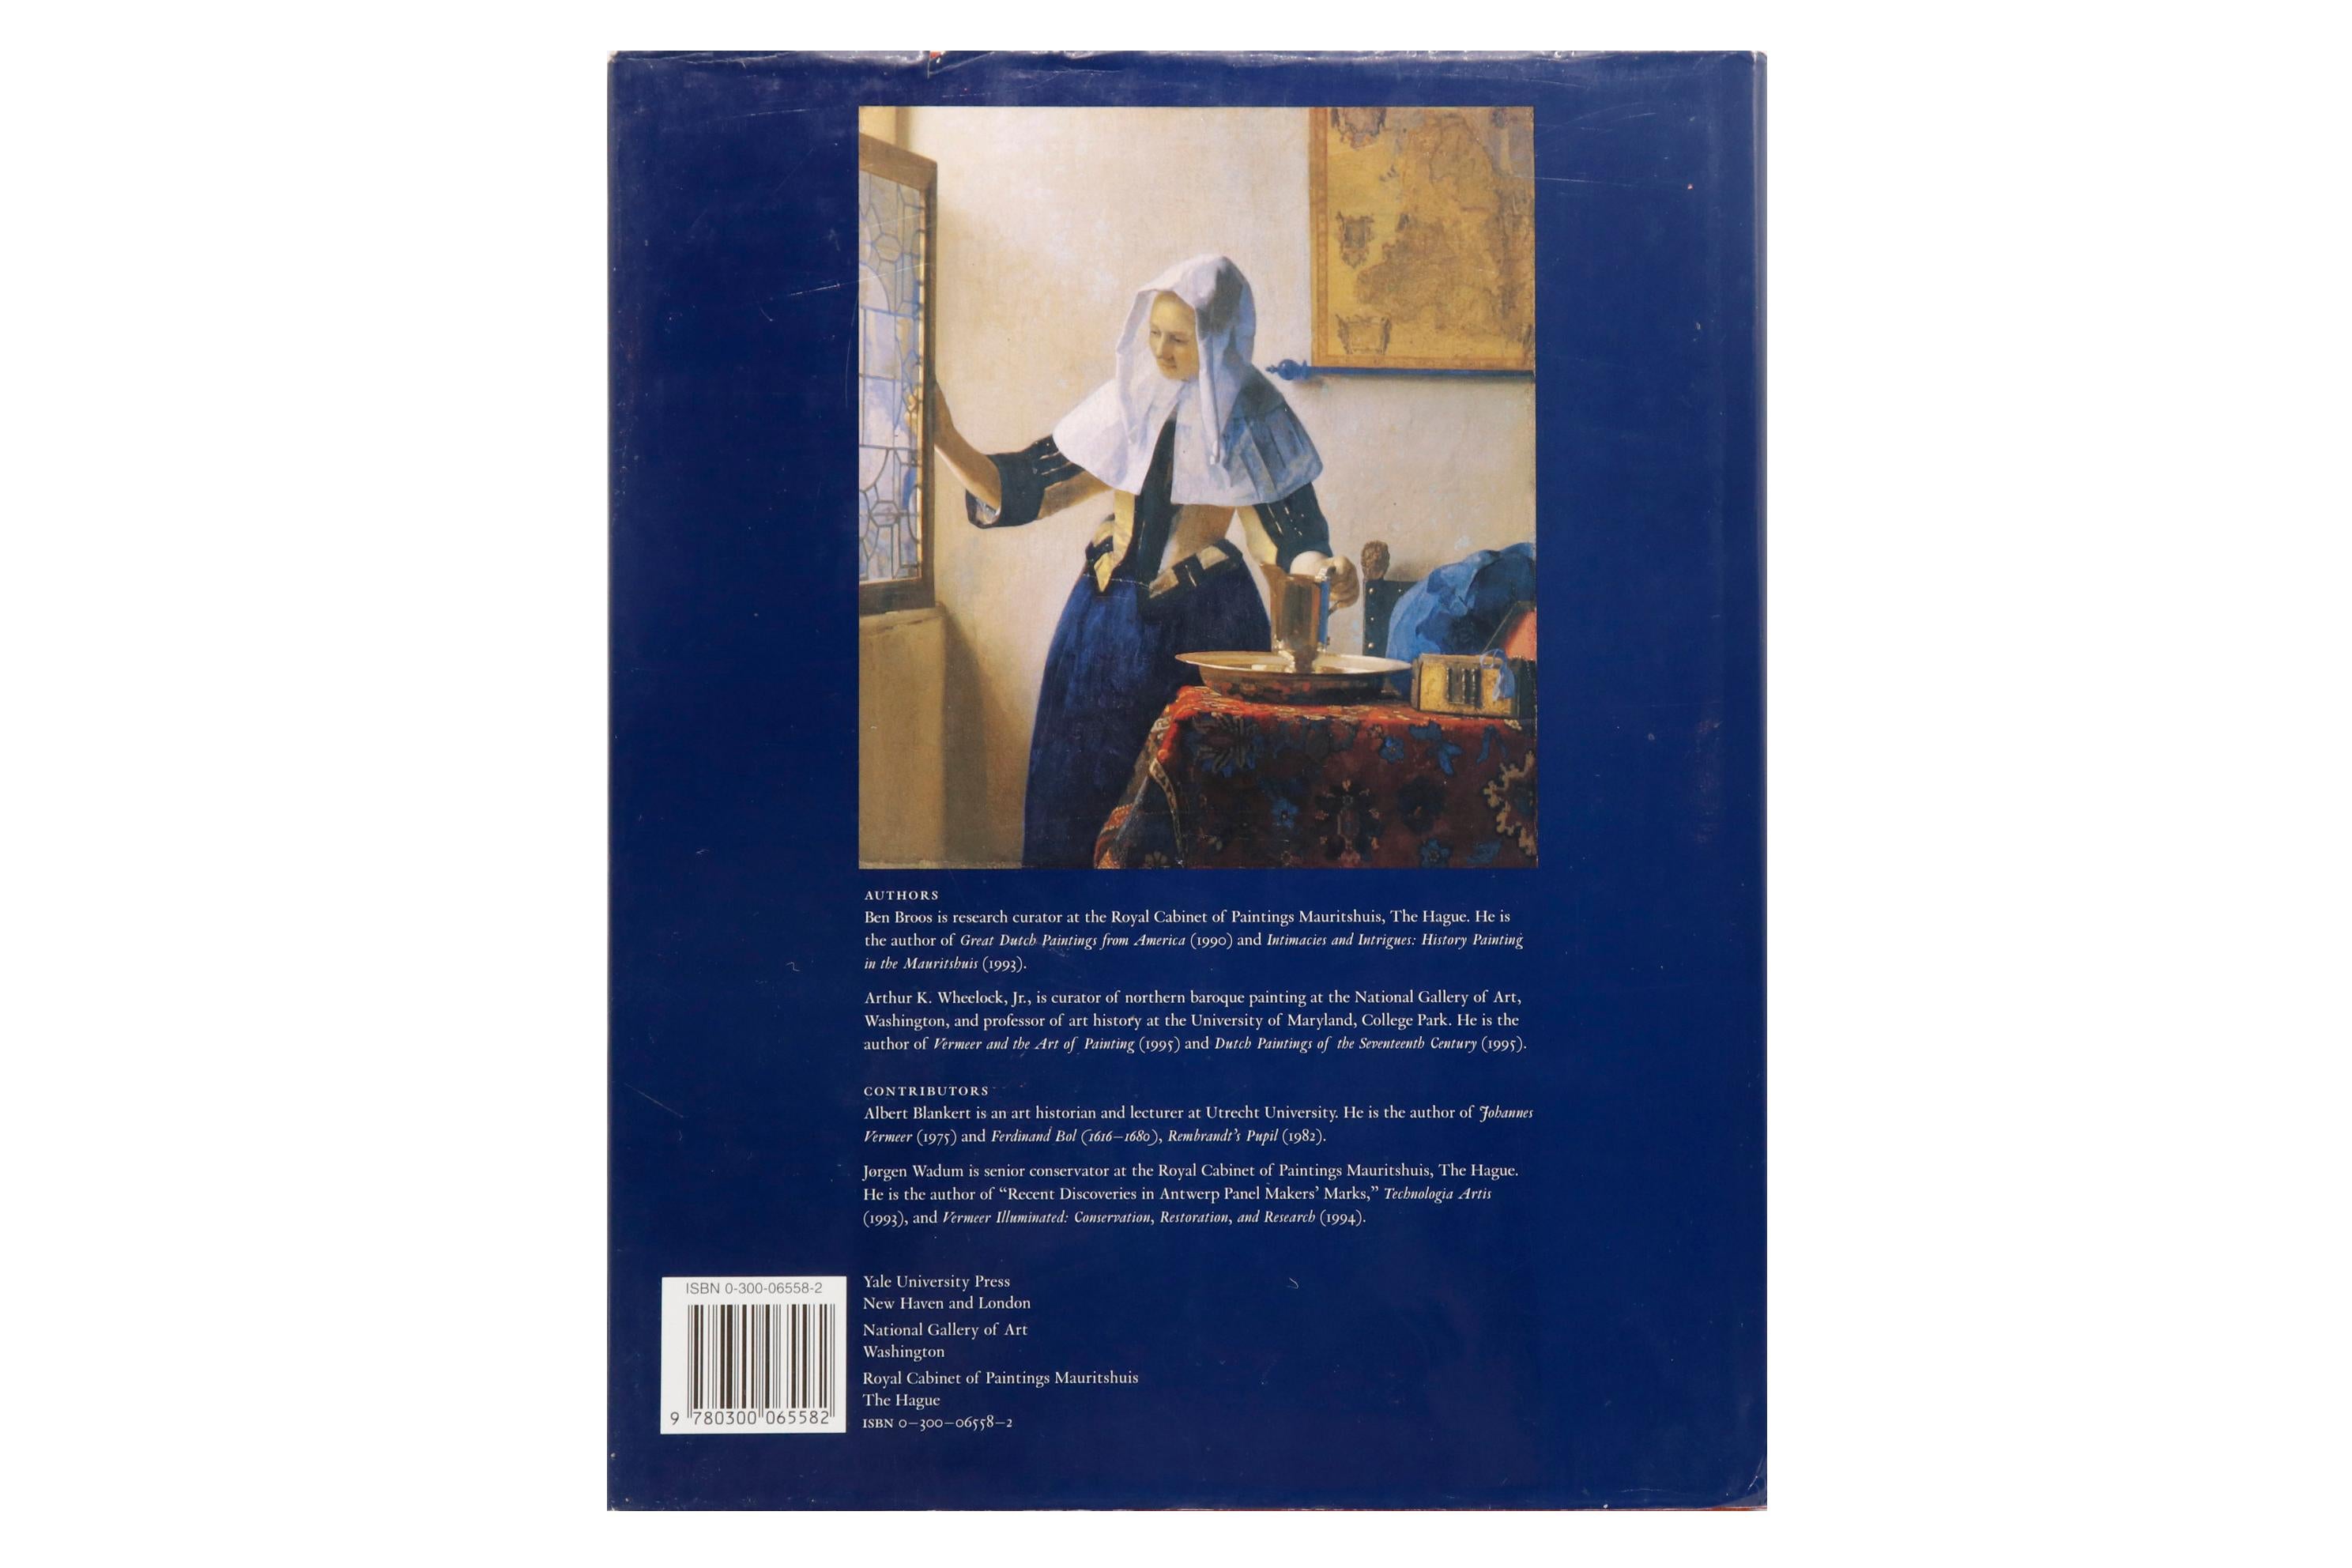 Johannes Vermeer art book from the exhibition held at The National Gallery of Art, Washington from 12 November 1995 - 11 February 1996. Hardcover book with dustjacket, illustrated, 229 pages.